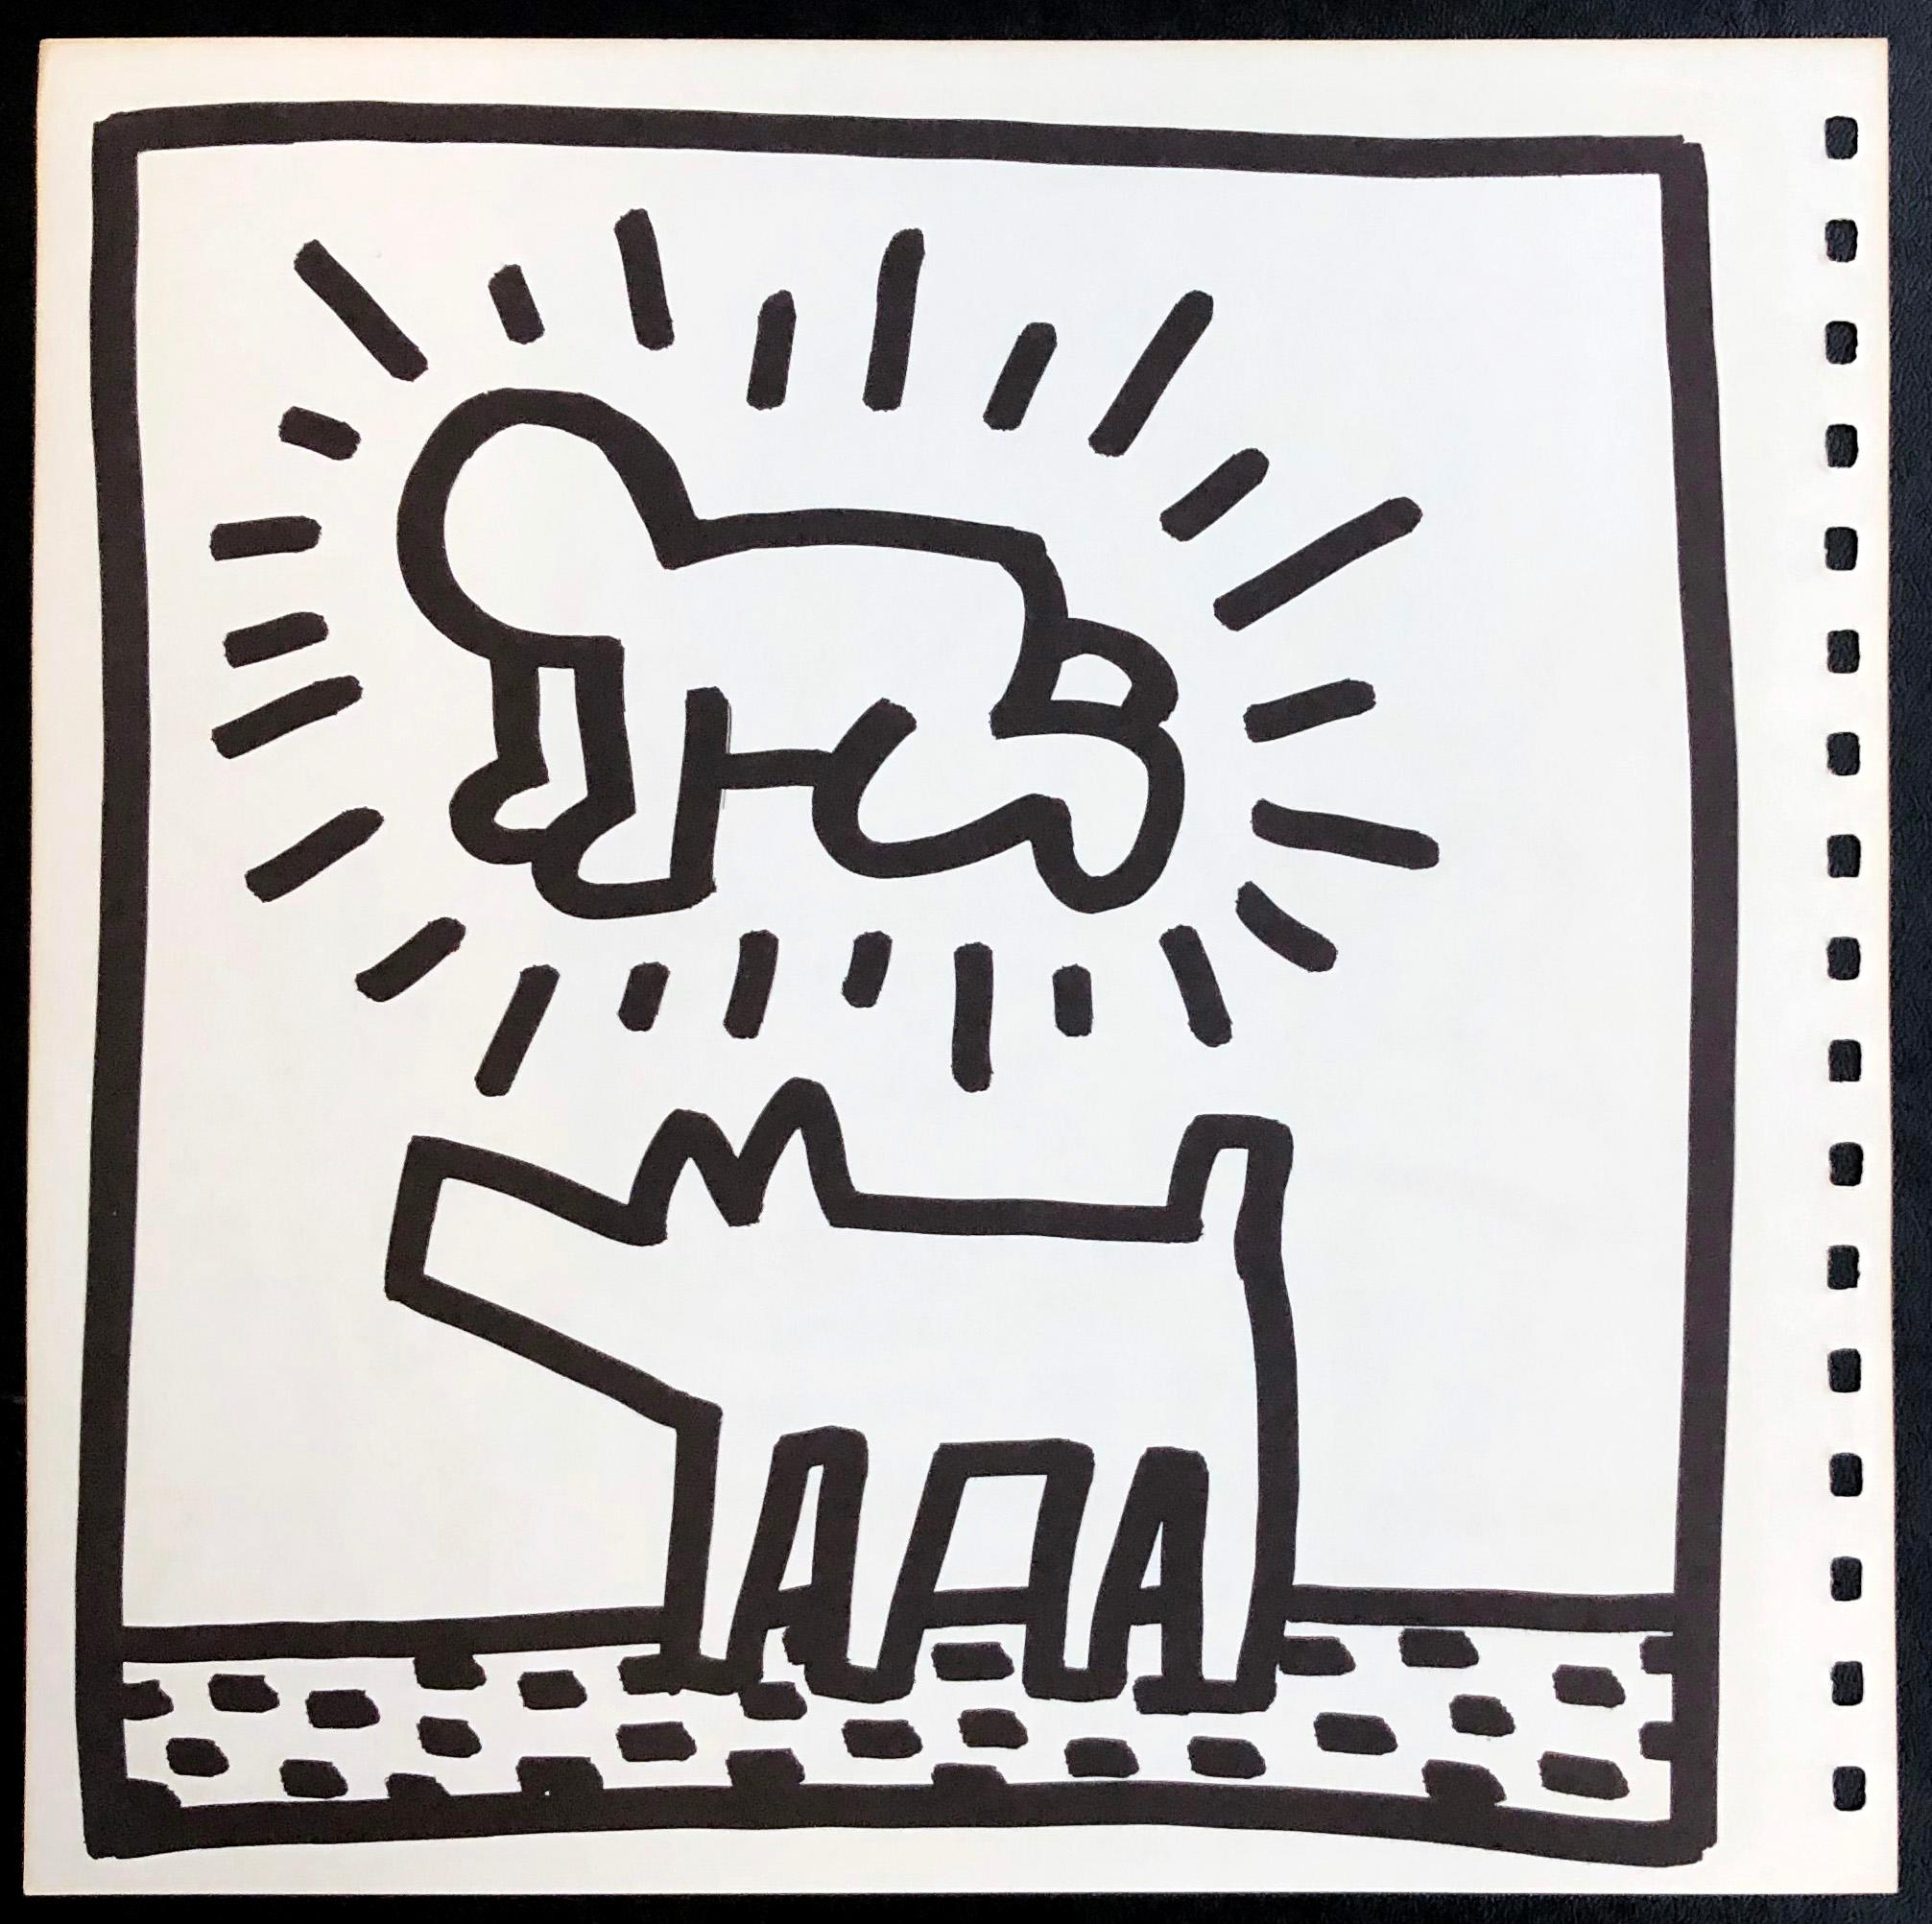 Keith Haring Tony Shafrazi Lithograph 1982
Double-sided offset lithograph published by Tony Shafrazi Gallery, New York, 1982 from an edition of 2000. 

Single sheet lithograph from the seminal spiral bound, early monograph showcasing Haring's work.